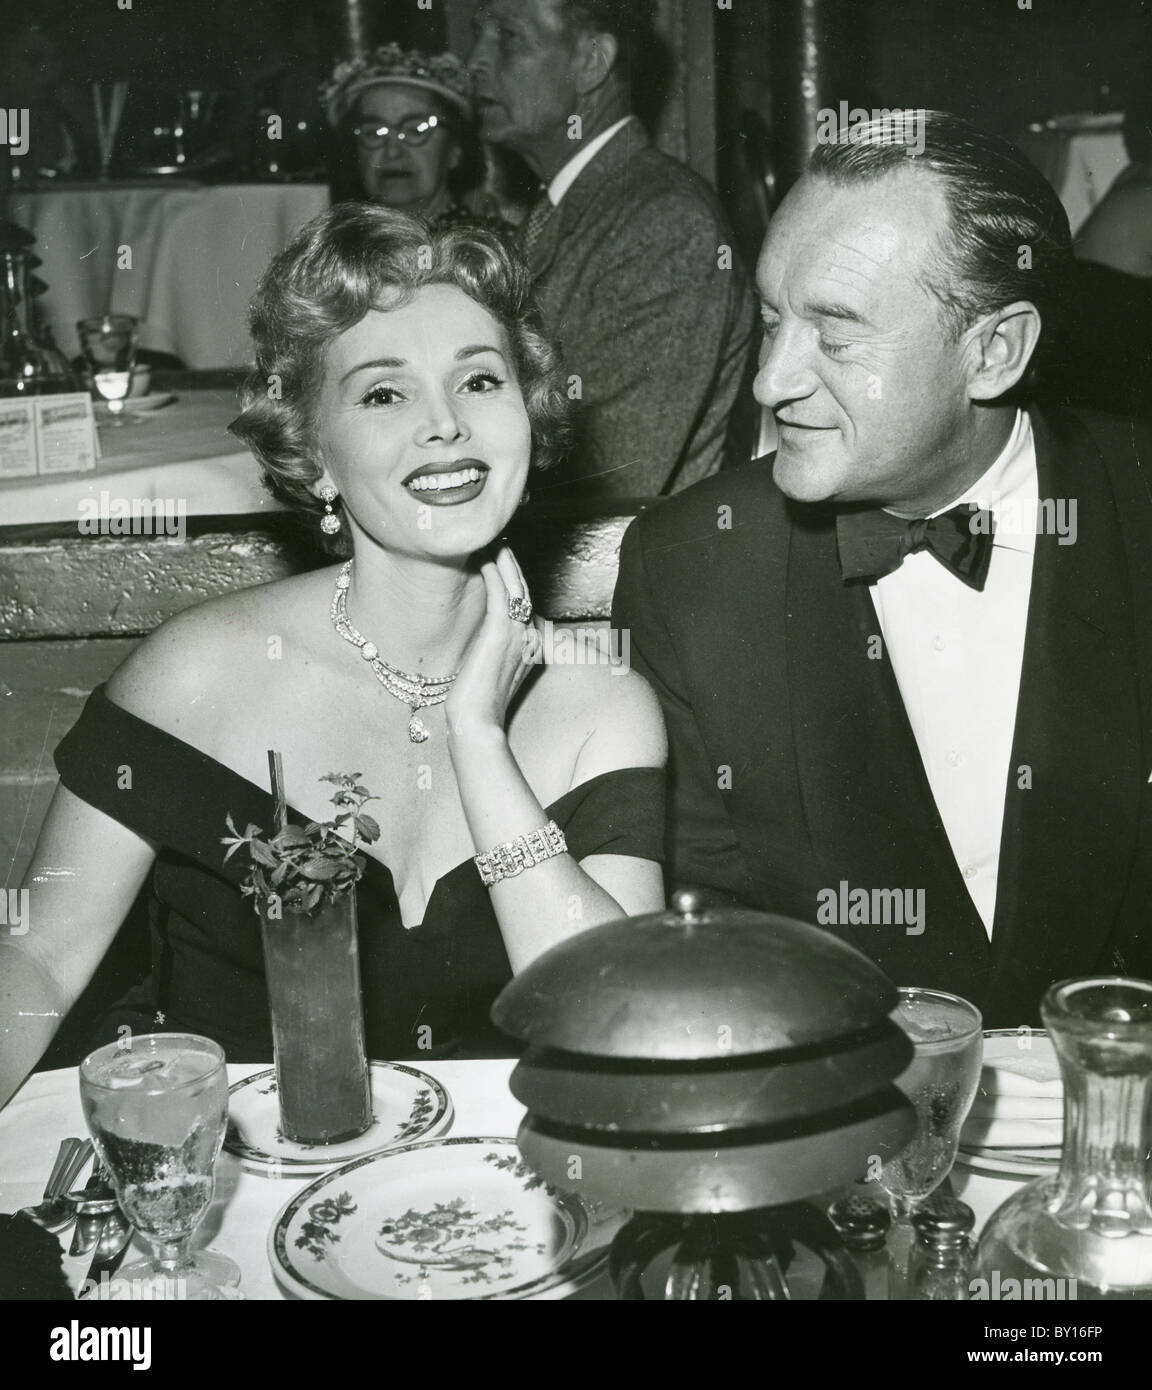 ZSA ZSA GABOR Hungarian-American actress with third husband George Sanders  (married1949-1954 Stock Photo - Alamy